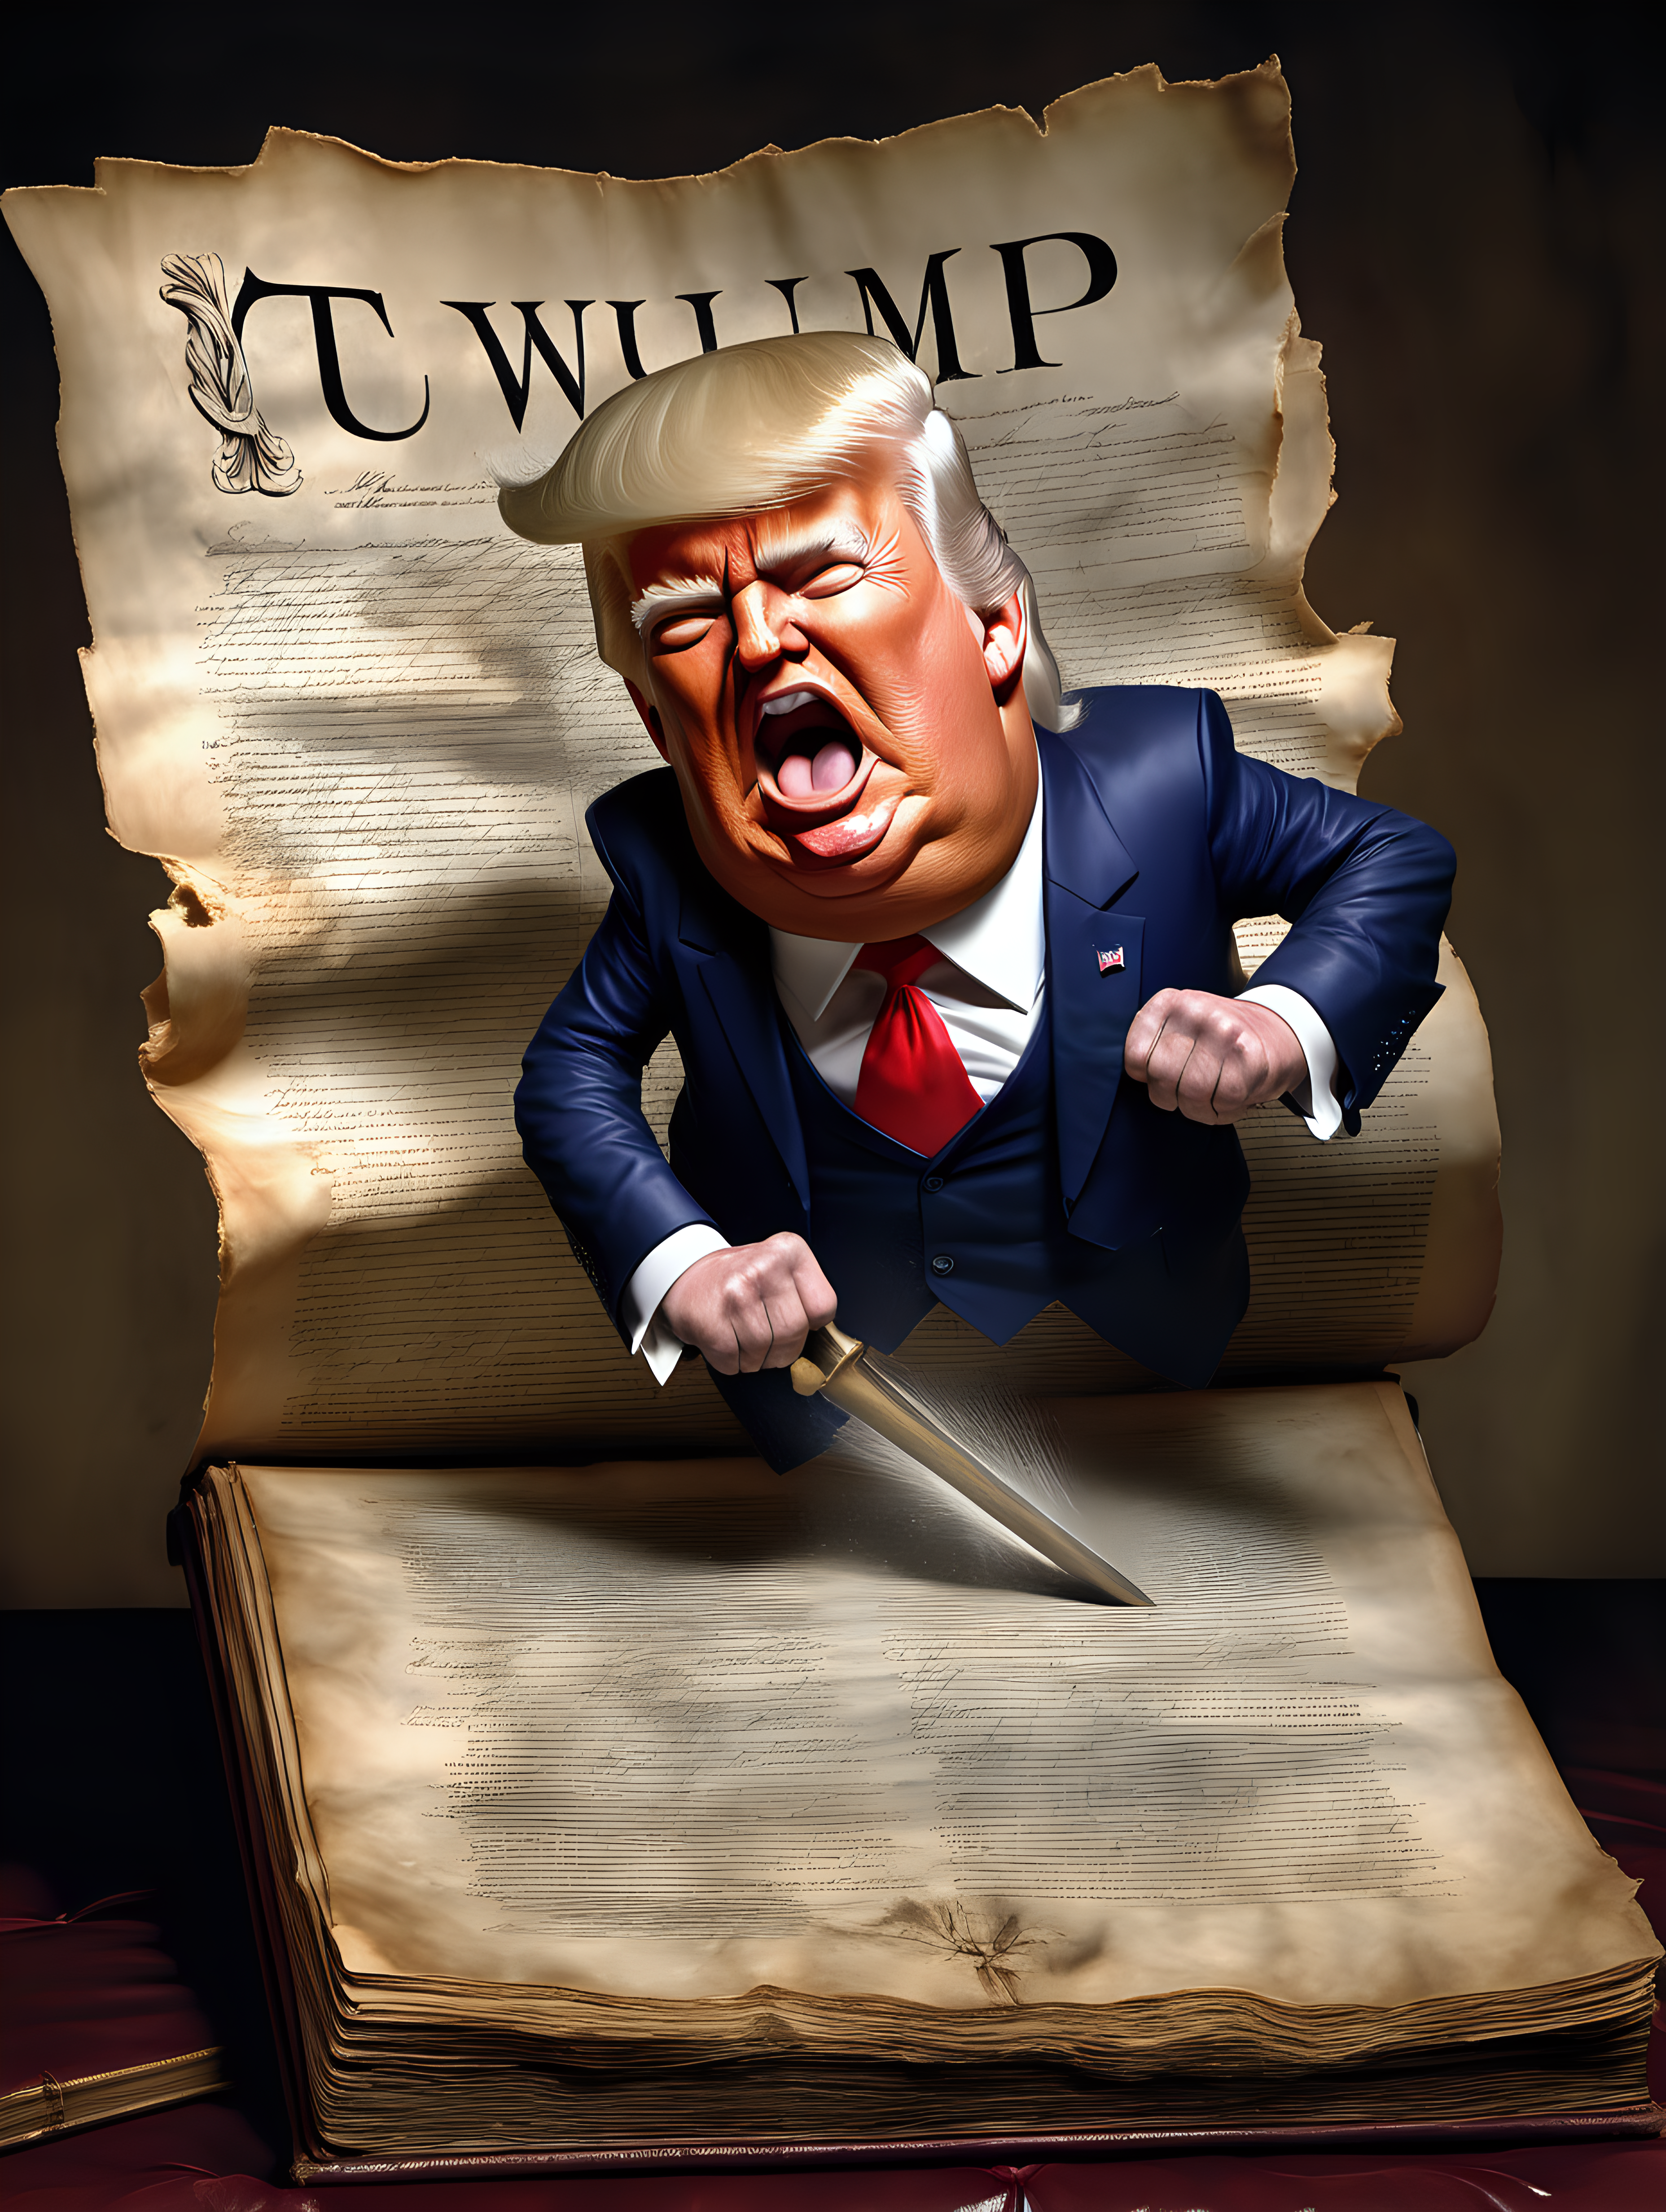 Donald Trump ripping up the U.S. Constitution